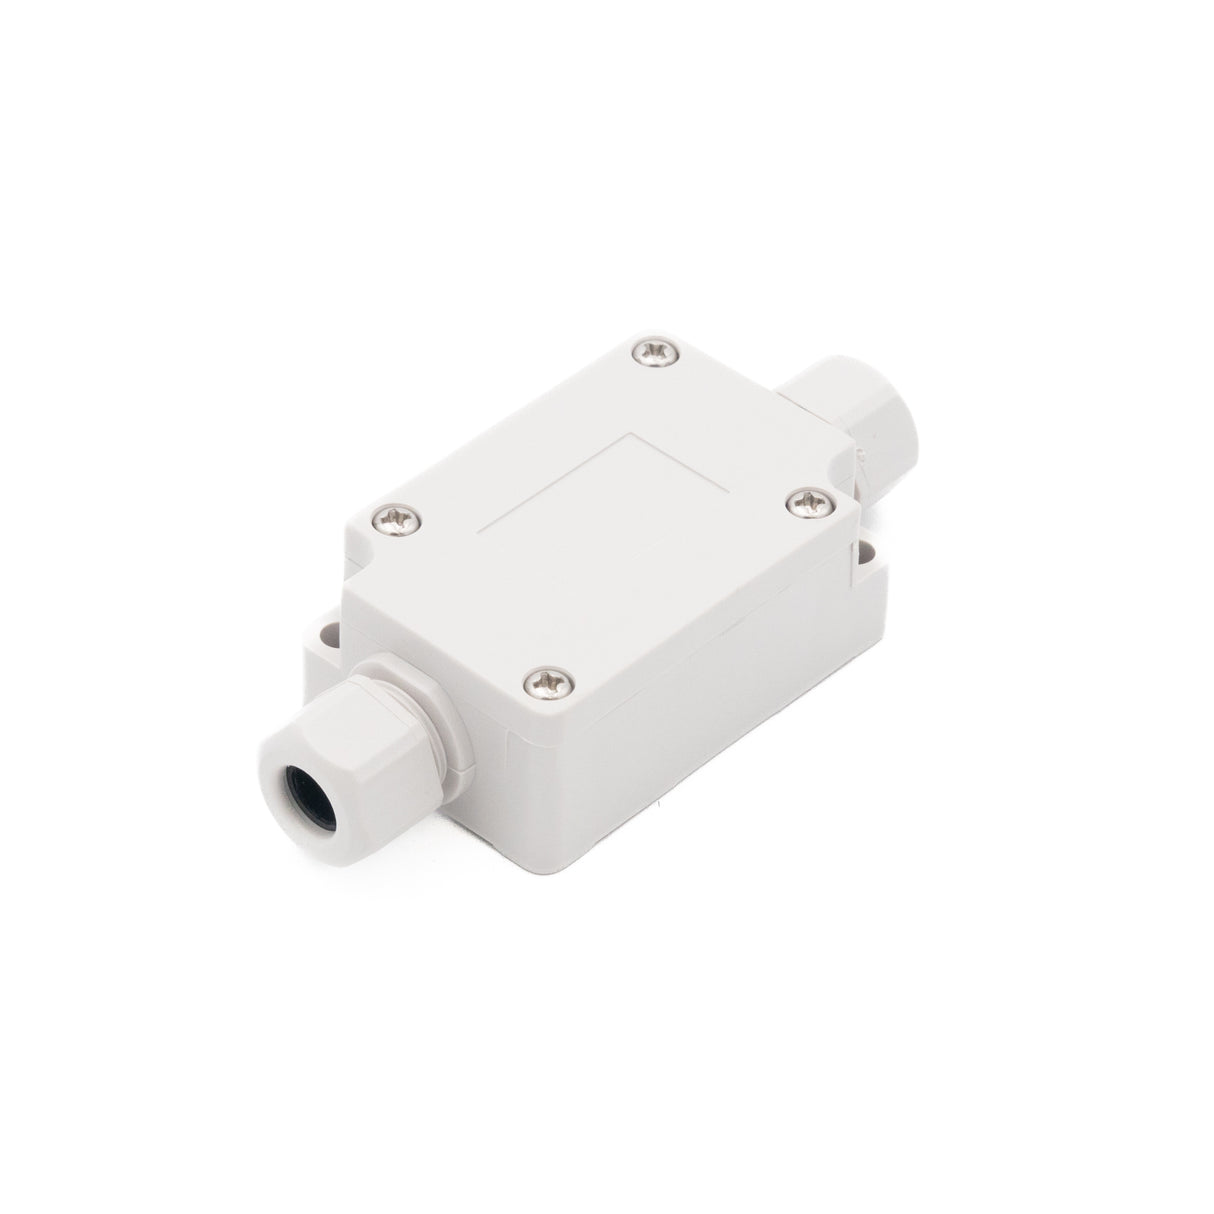 Boxco Terminal Box 4-pole with Waterproof Connector 40x60x24mm, IP67, IK08, ABS, Grey Cover - PHOTO 1